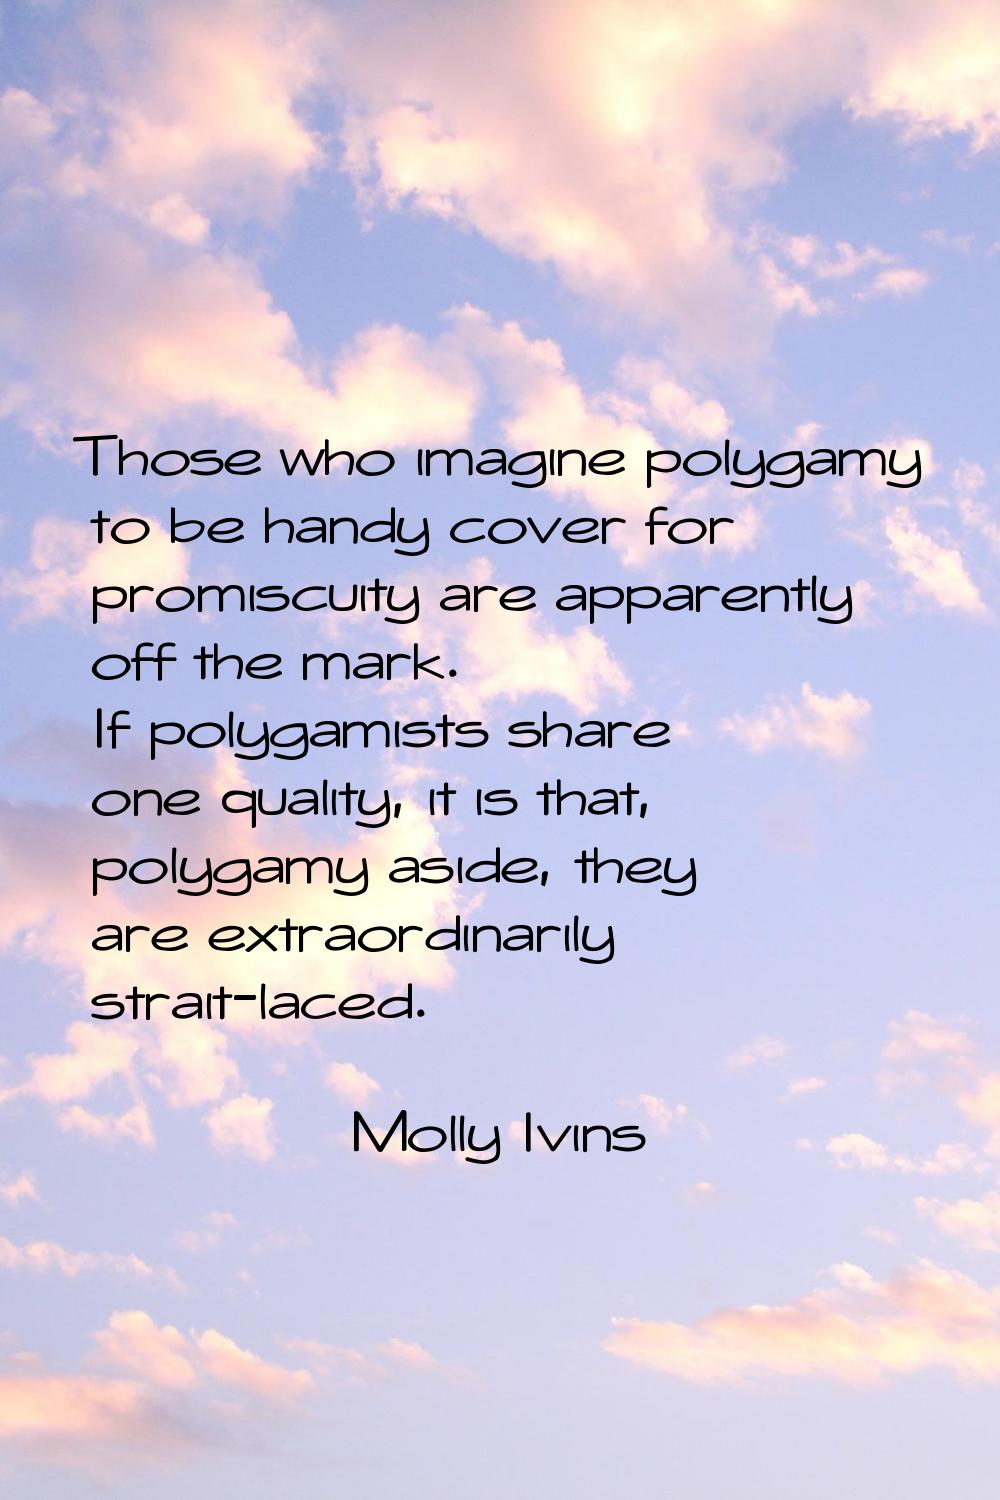 Those who imagine polygamy to be handy cover for promiscuity are apparently off the mark. If polyga